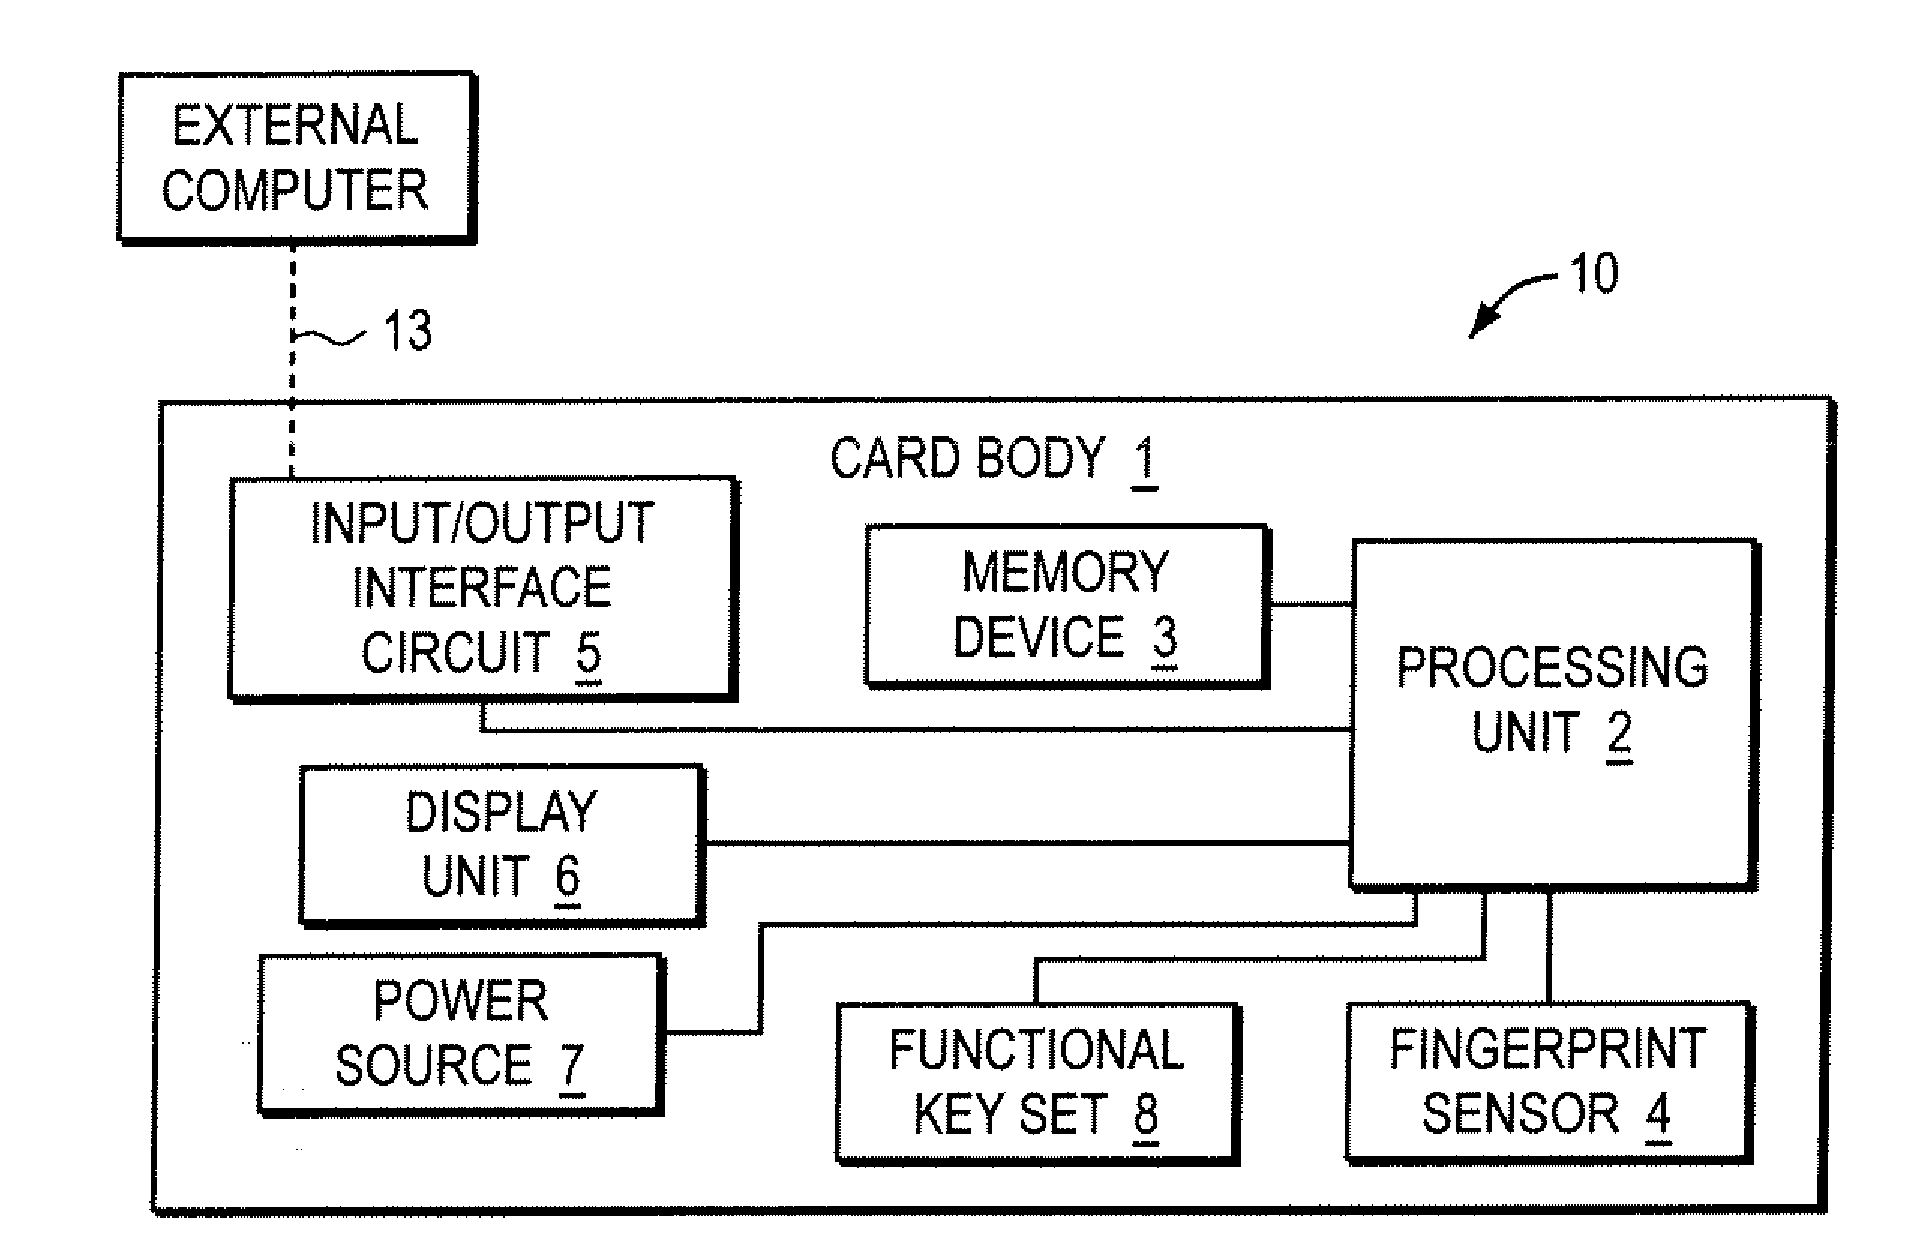 Using various flash memory cells to build USB data flash cards with multiple partitions and autorun function